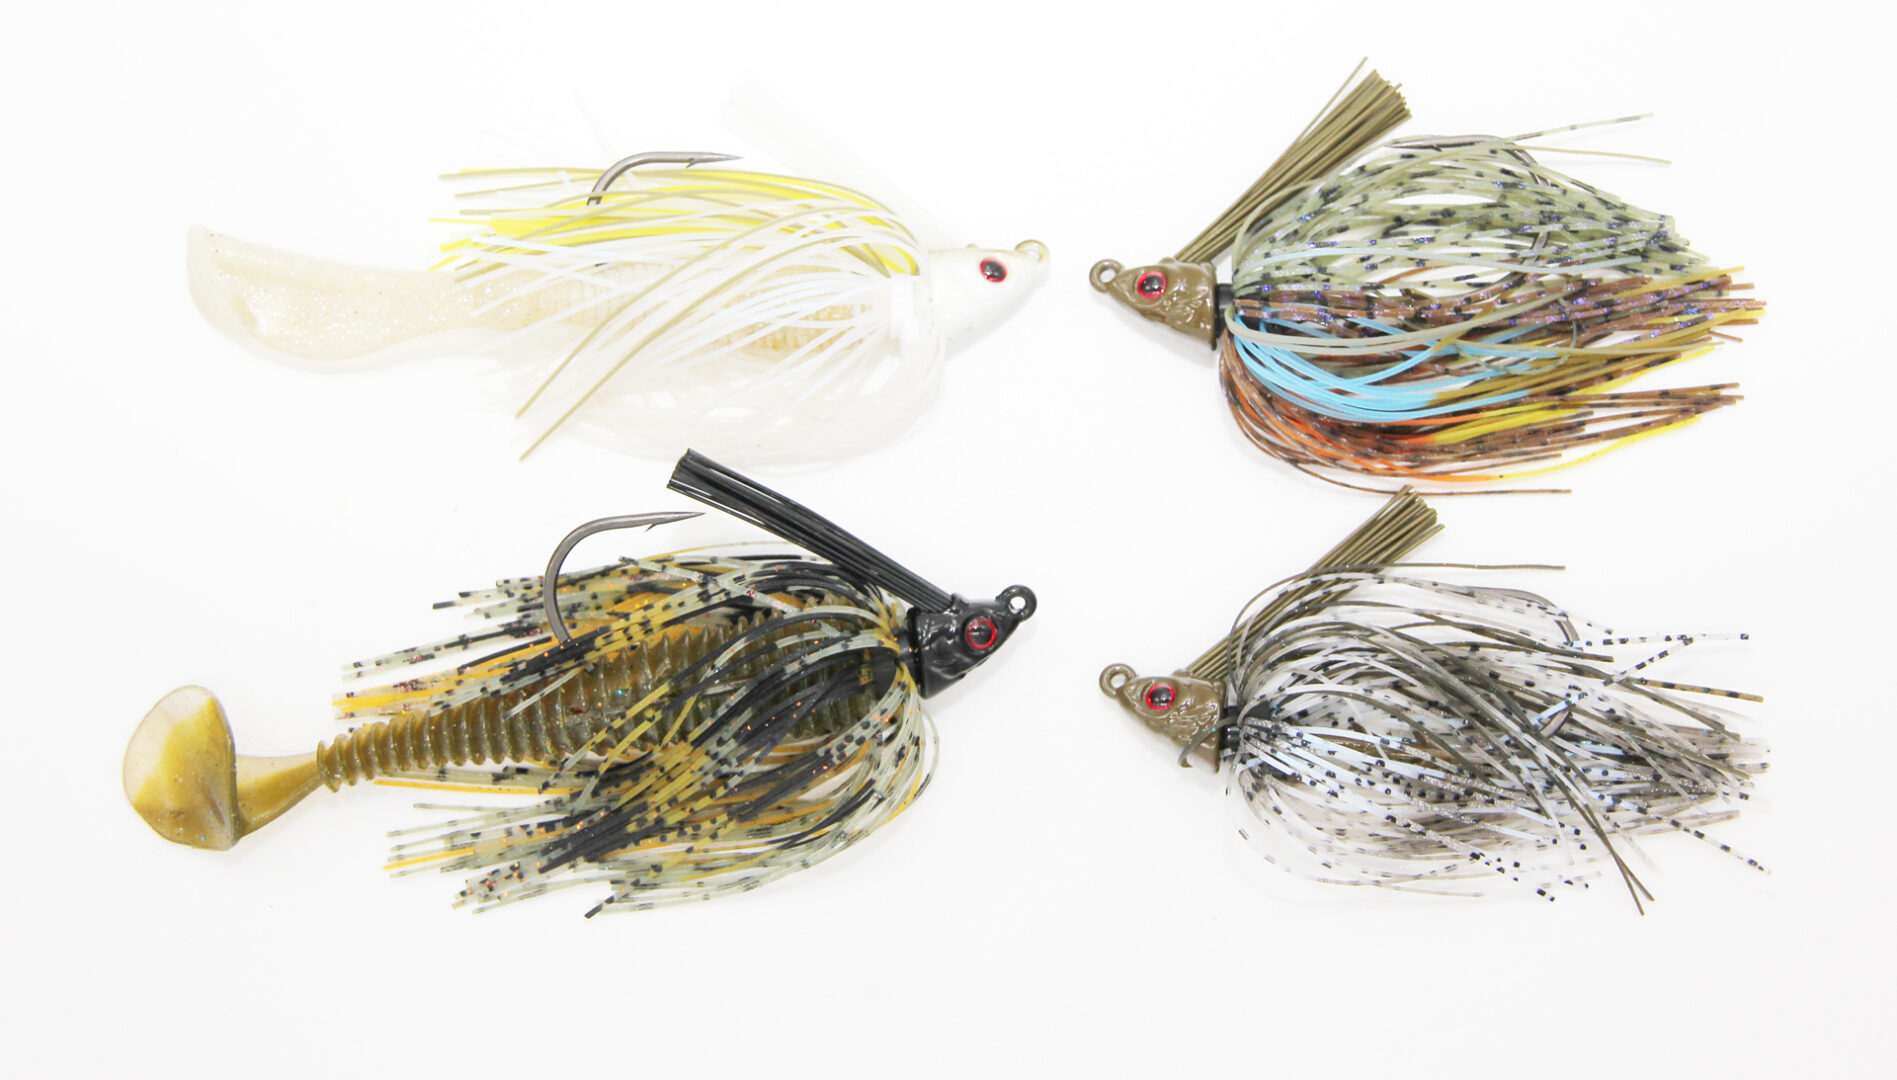 Trigger X Introduces New Creature Baits for Ice Fishing Action